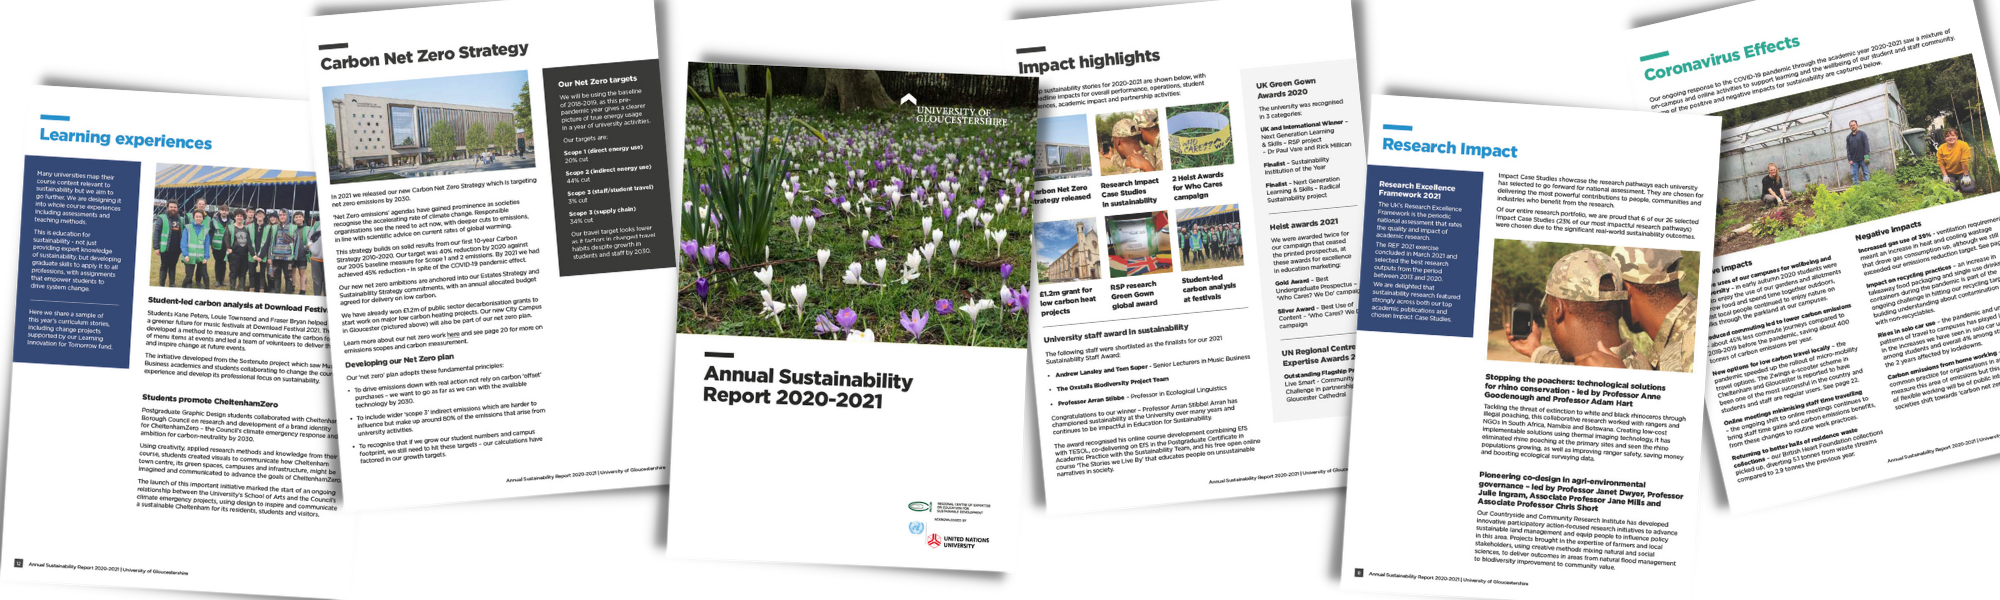 Six example pages from the Annual Sustainability Report 2020-2021